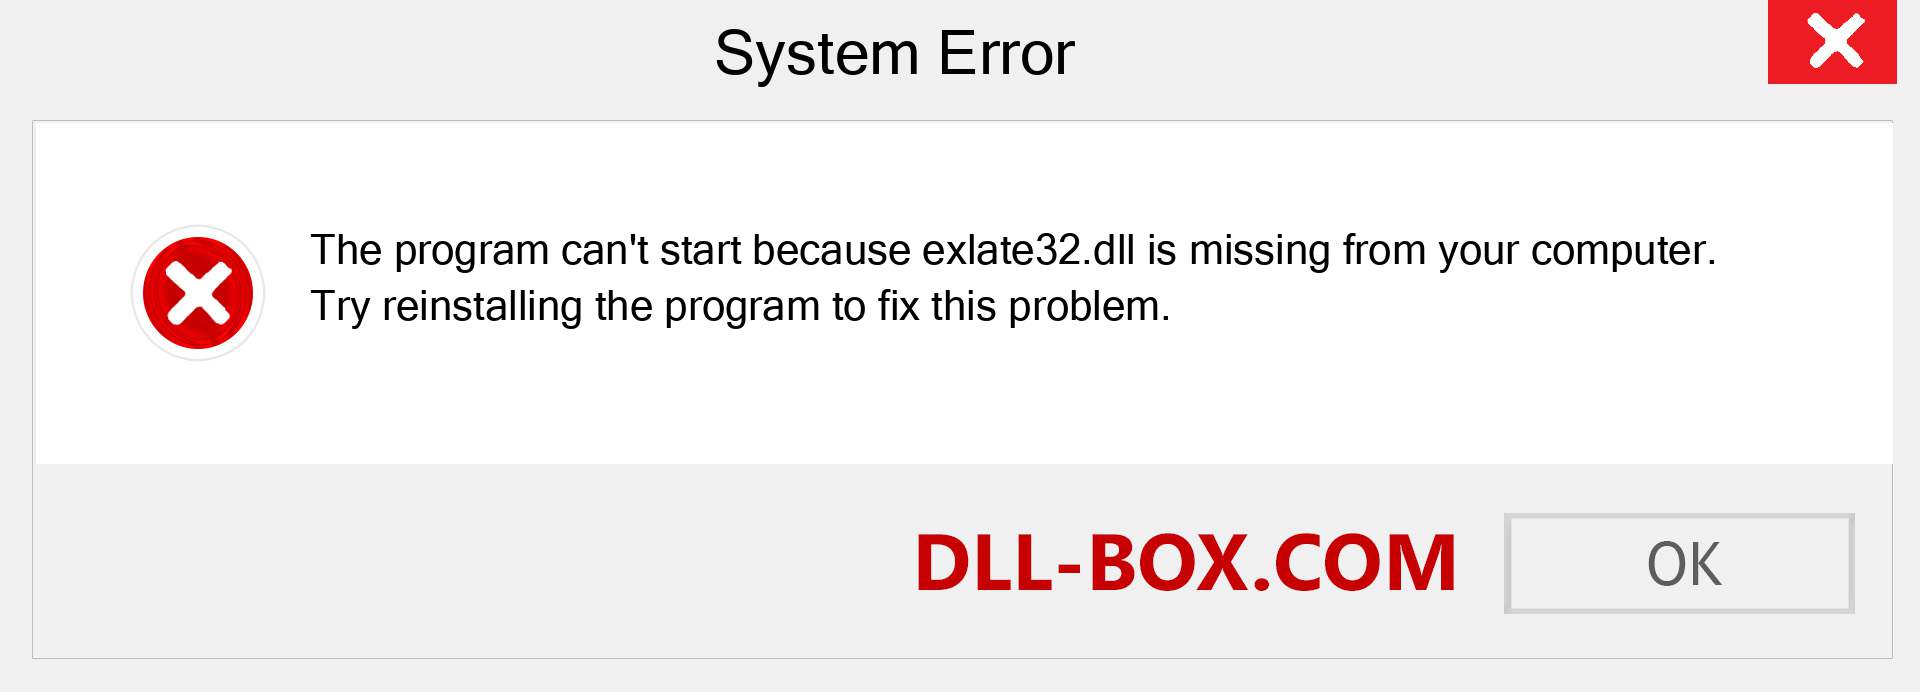  exlate32.dll file is missing?. Download for Windows 7, 8, 10 - Fix  exlate32 dll Missing Error on Windows, photos, images